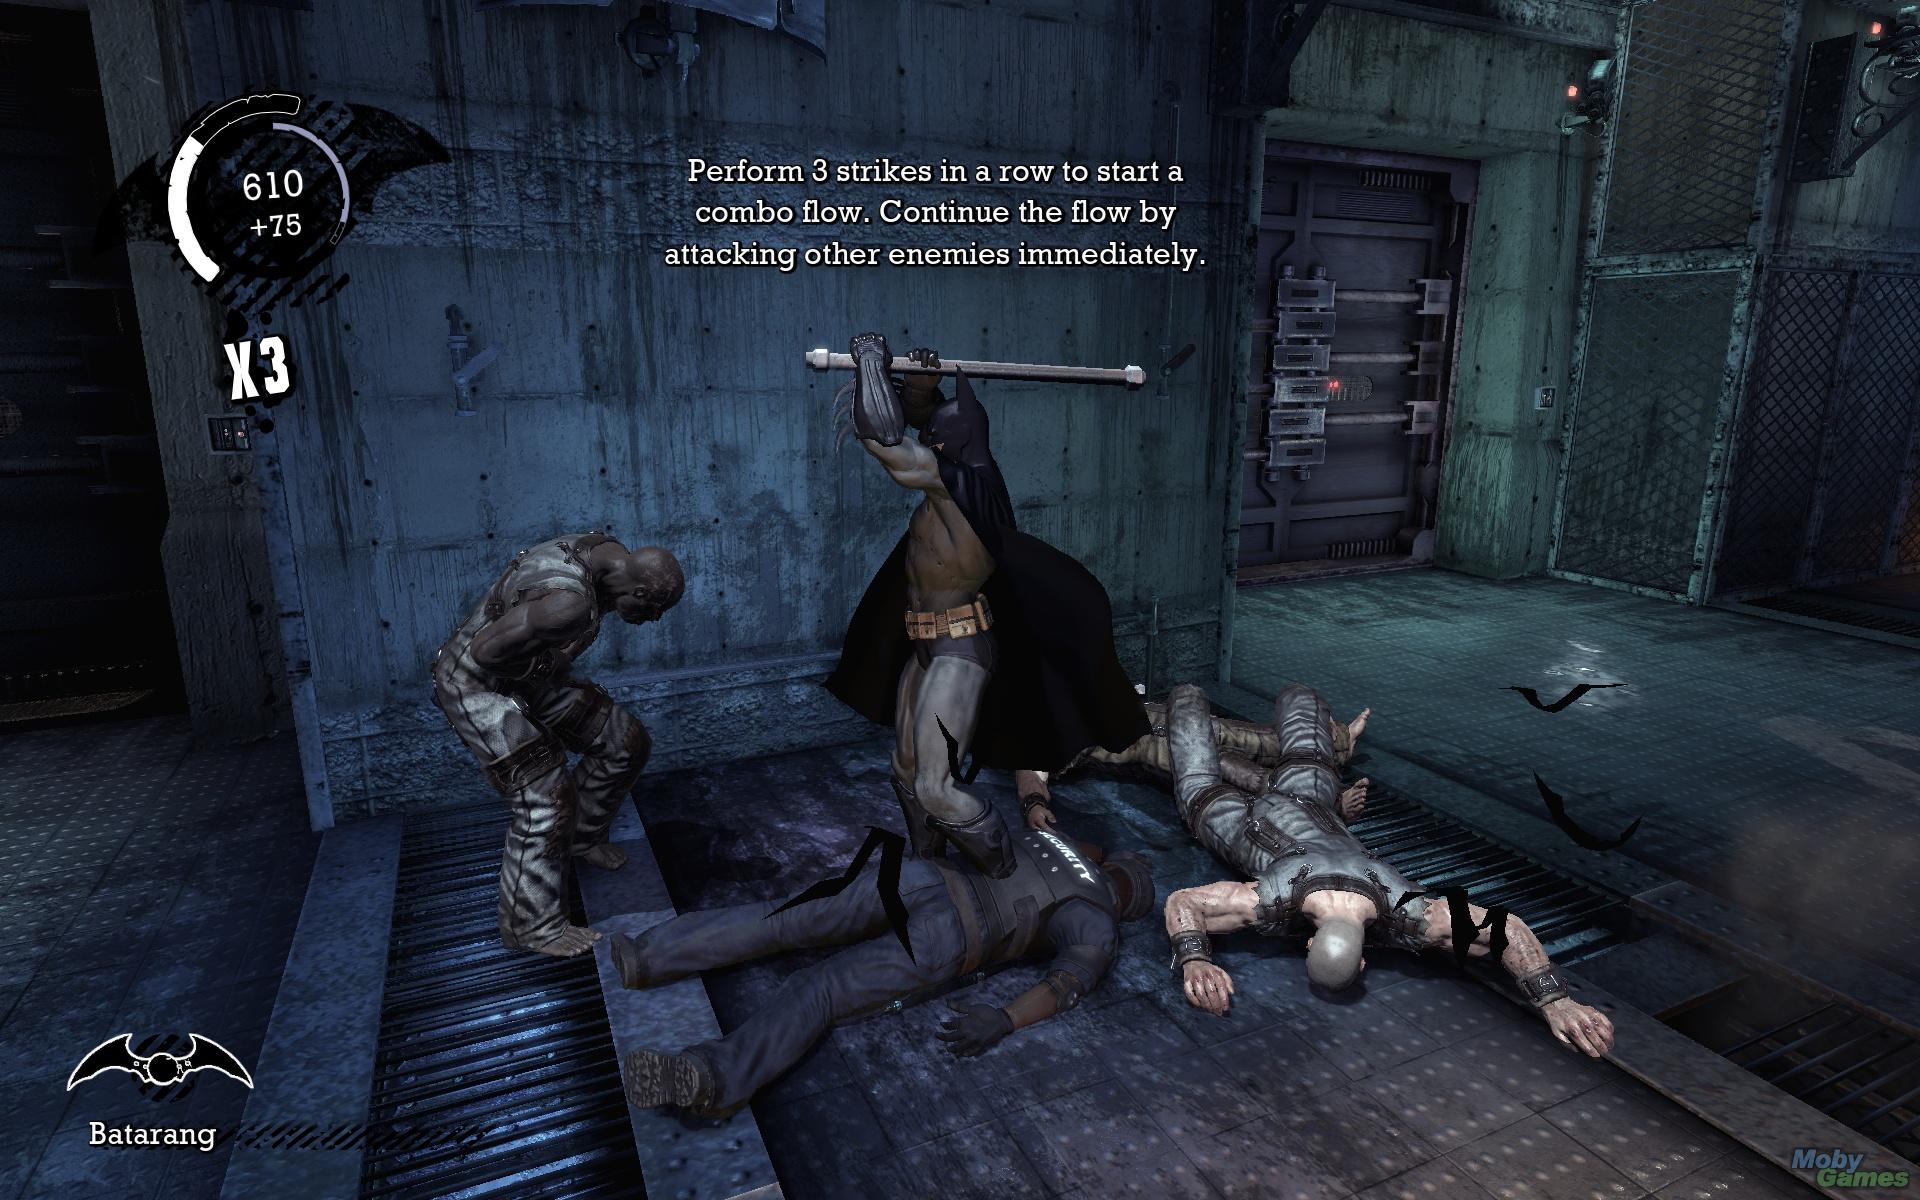 Batman: Arkham Asylum: 7 Best Things About The Game (& 3 That